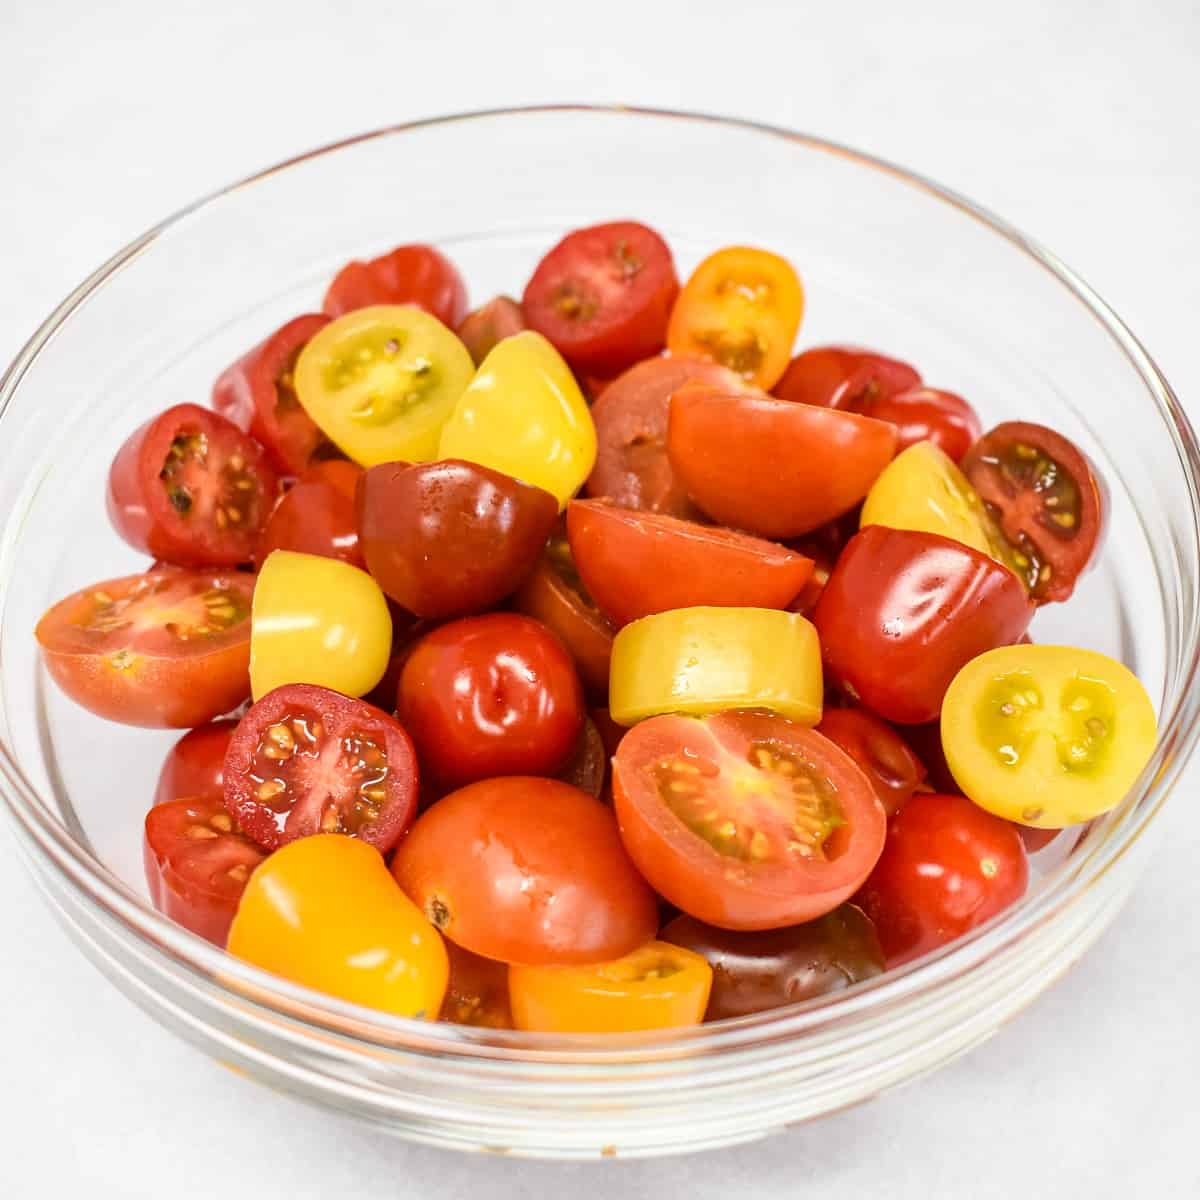 Red and yellow small tomatoes cut in half in a glass bowl on a white table.